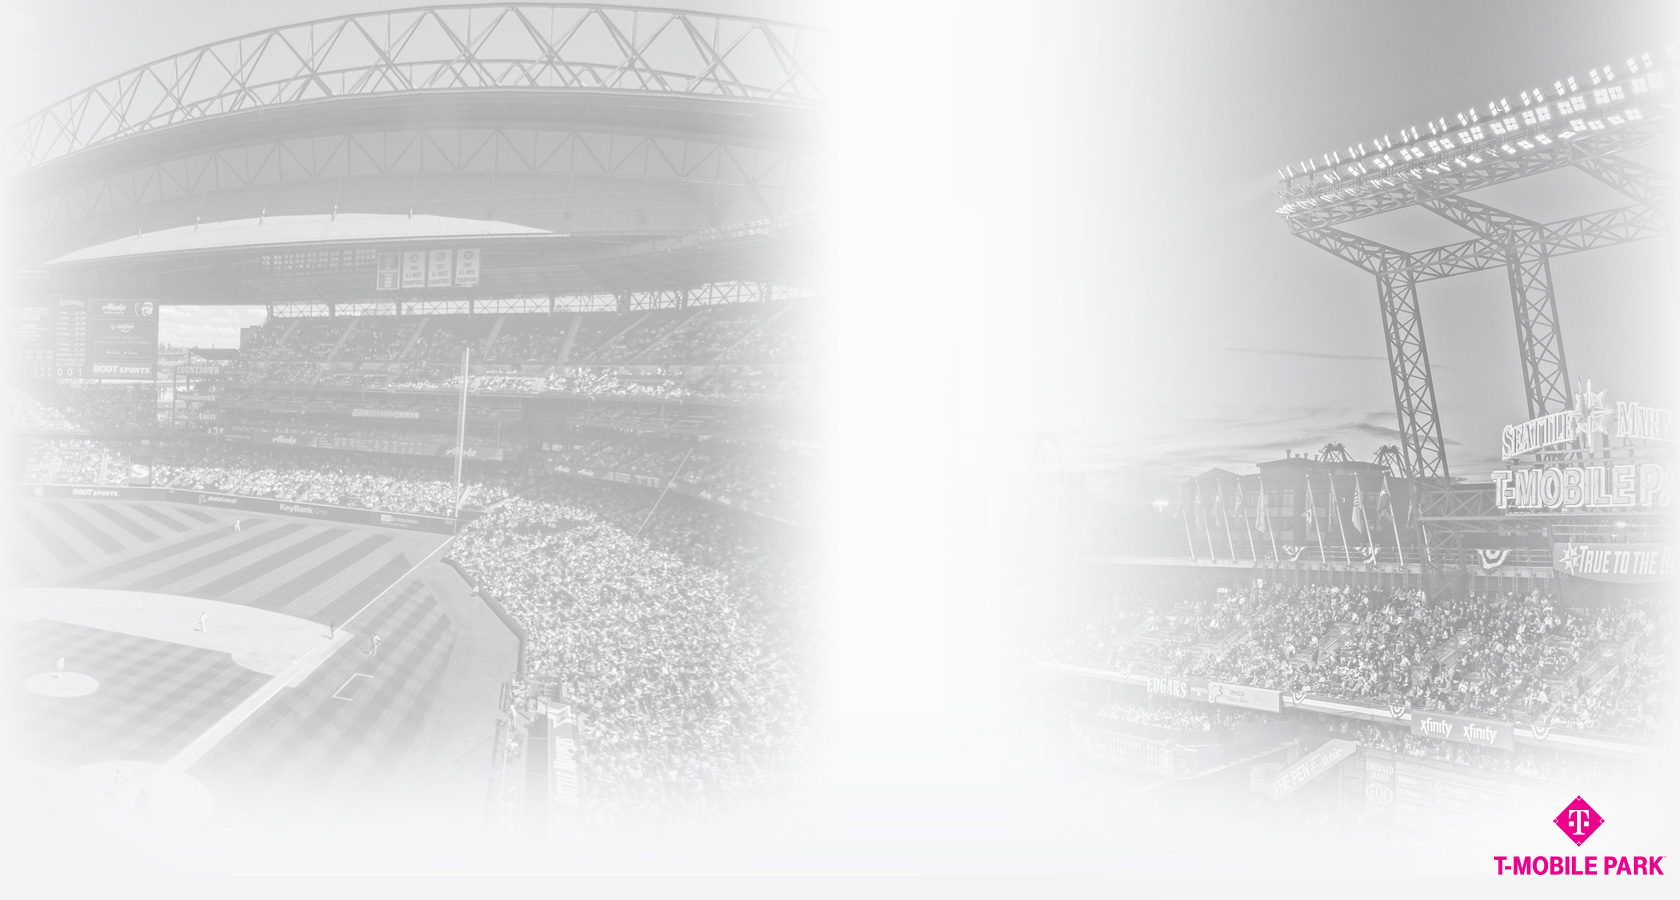 Official Seattle Mariners Website